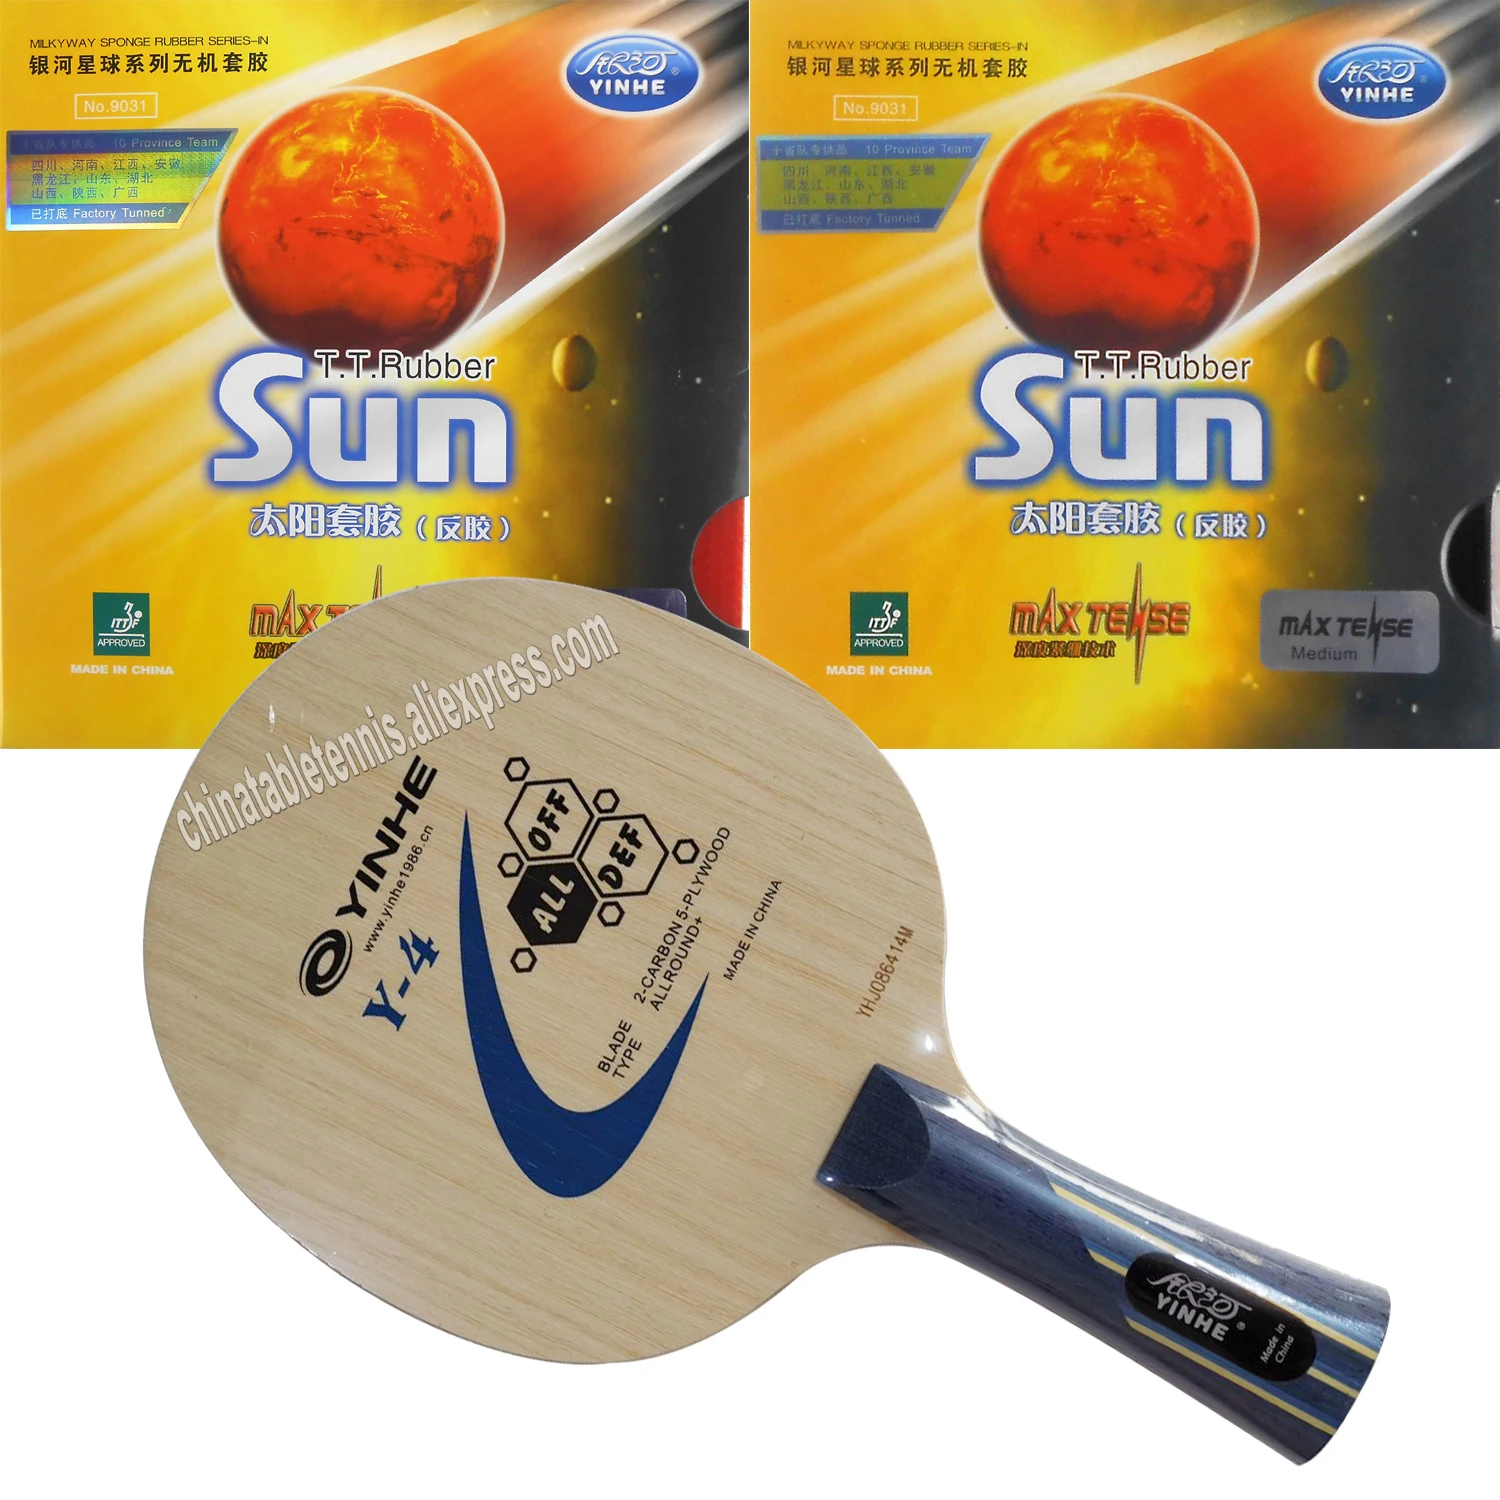 Milkyway Yinhe Sun Table Tennis Rubbers For Paddle Pips In Province 